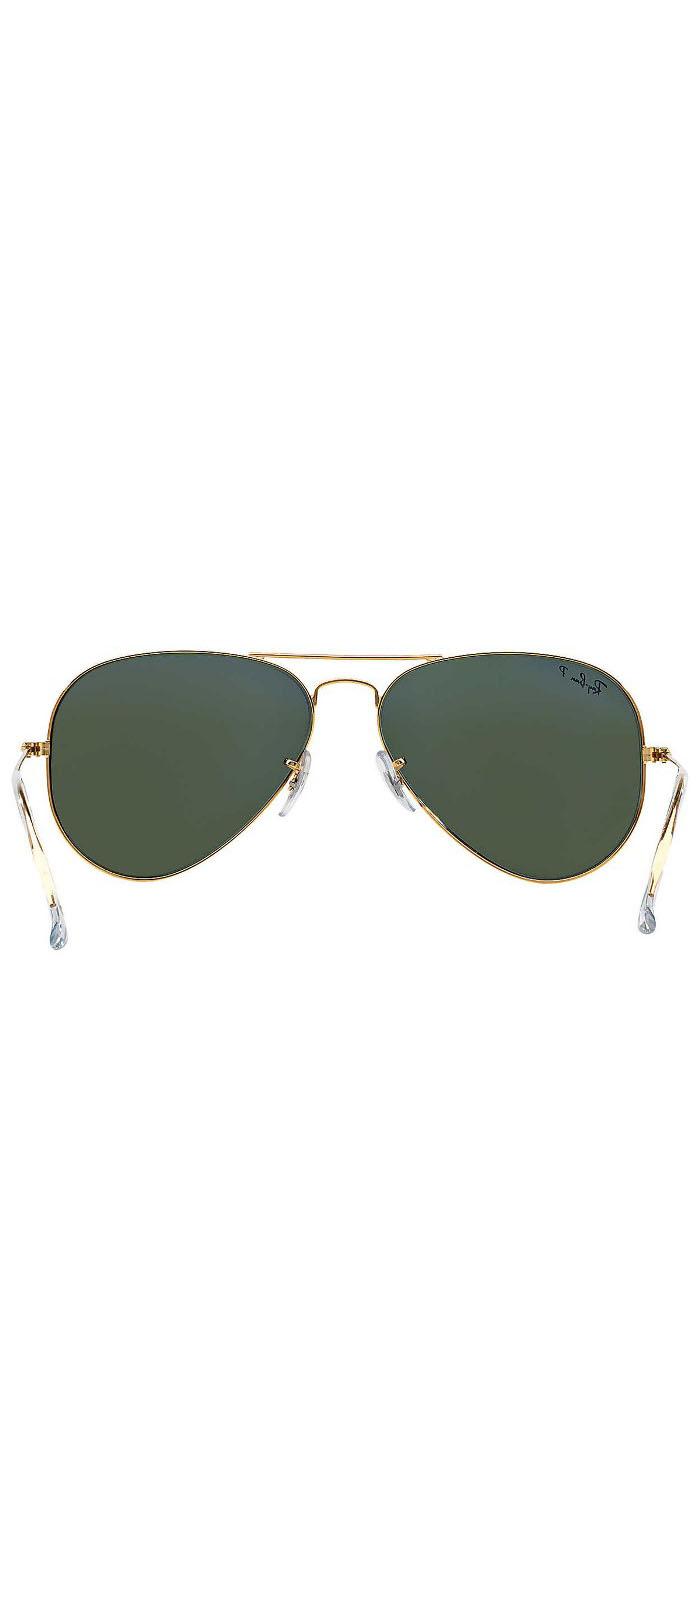 Ray-Ban Sunglasses - RB3025-001/58-55 - LifeStyle Collection